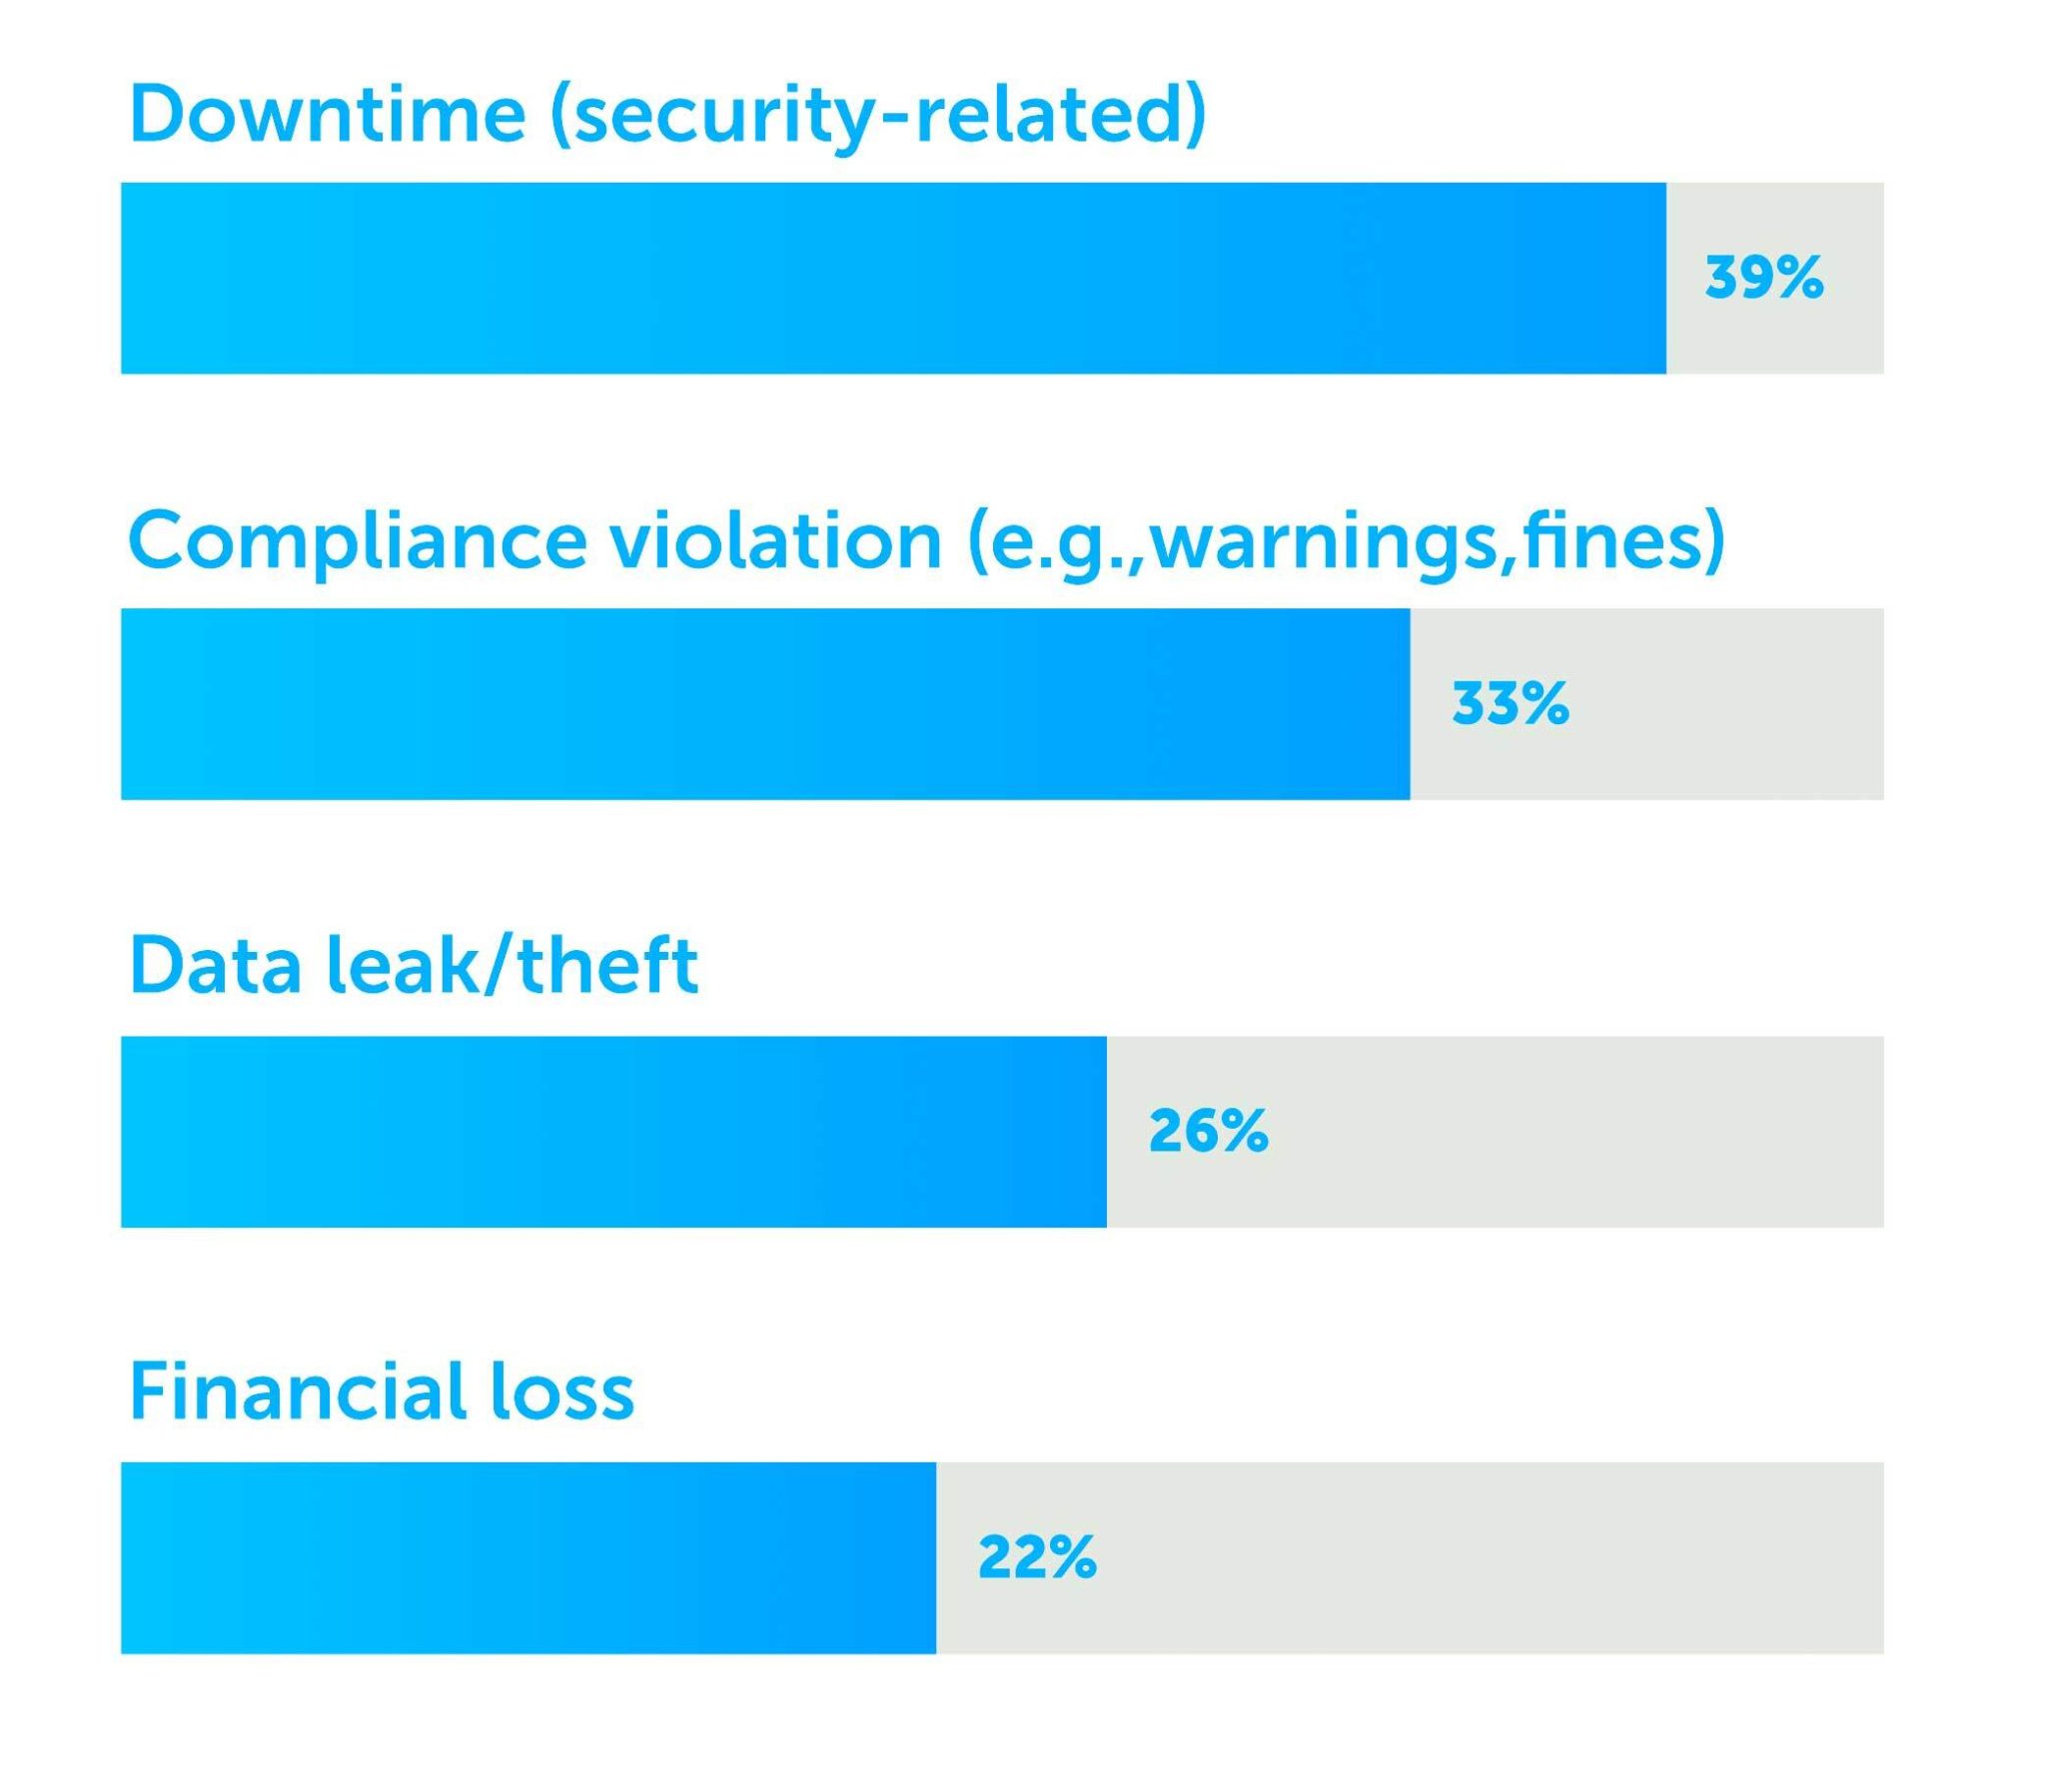 Problems include security-related downtime (39%), compliance violation (33%), data leak or theft (26%) and financial loss (22%).